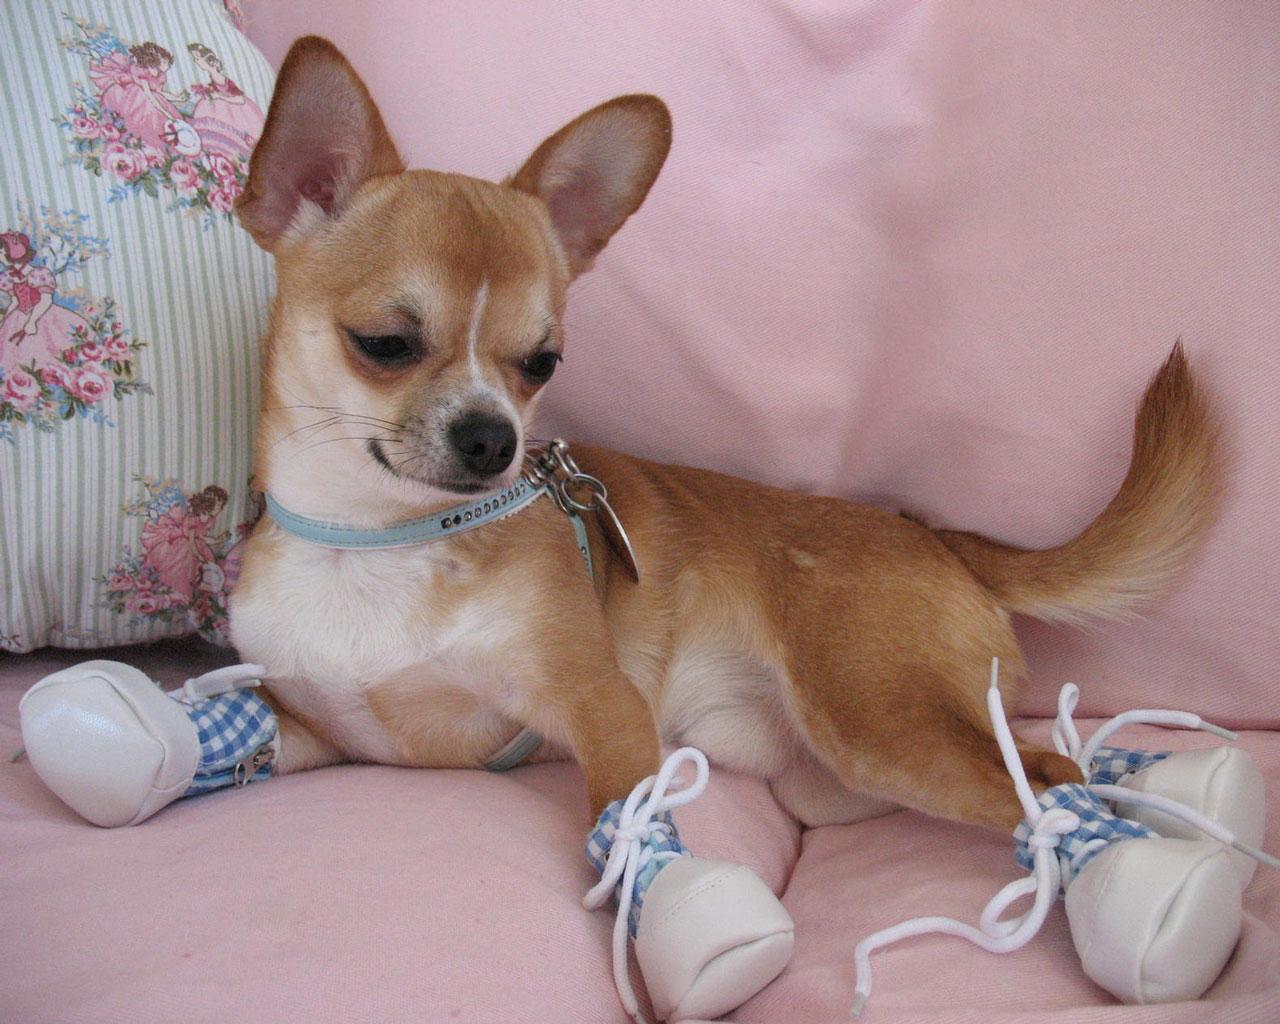 Chihuahua with Booties Wallpaper #1 1280 x 1024 